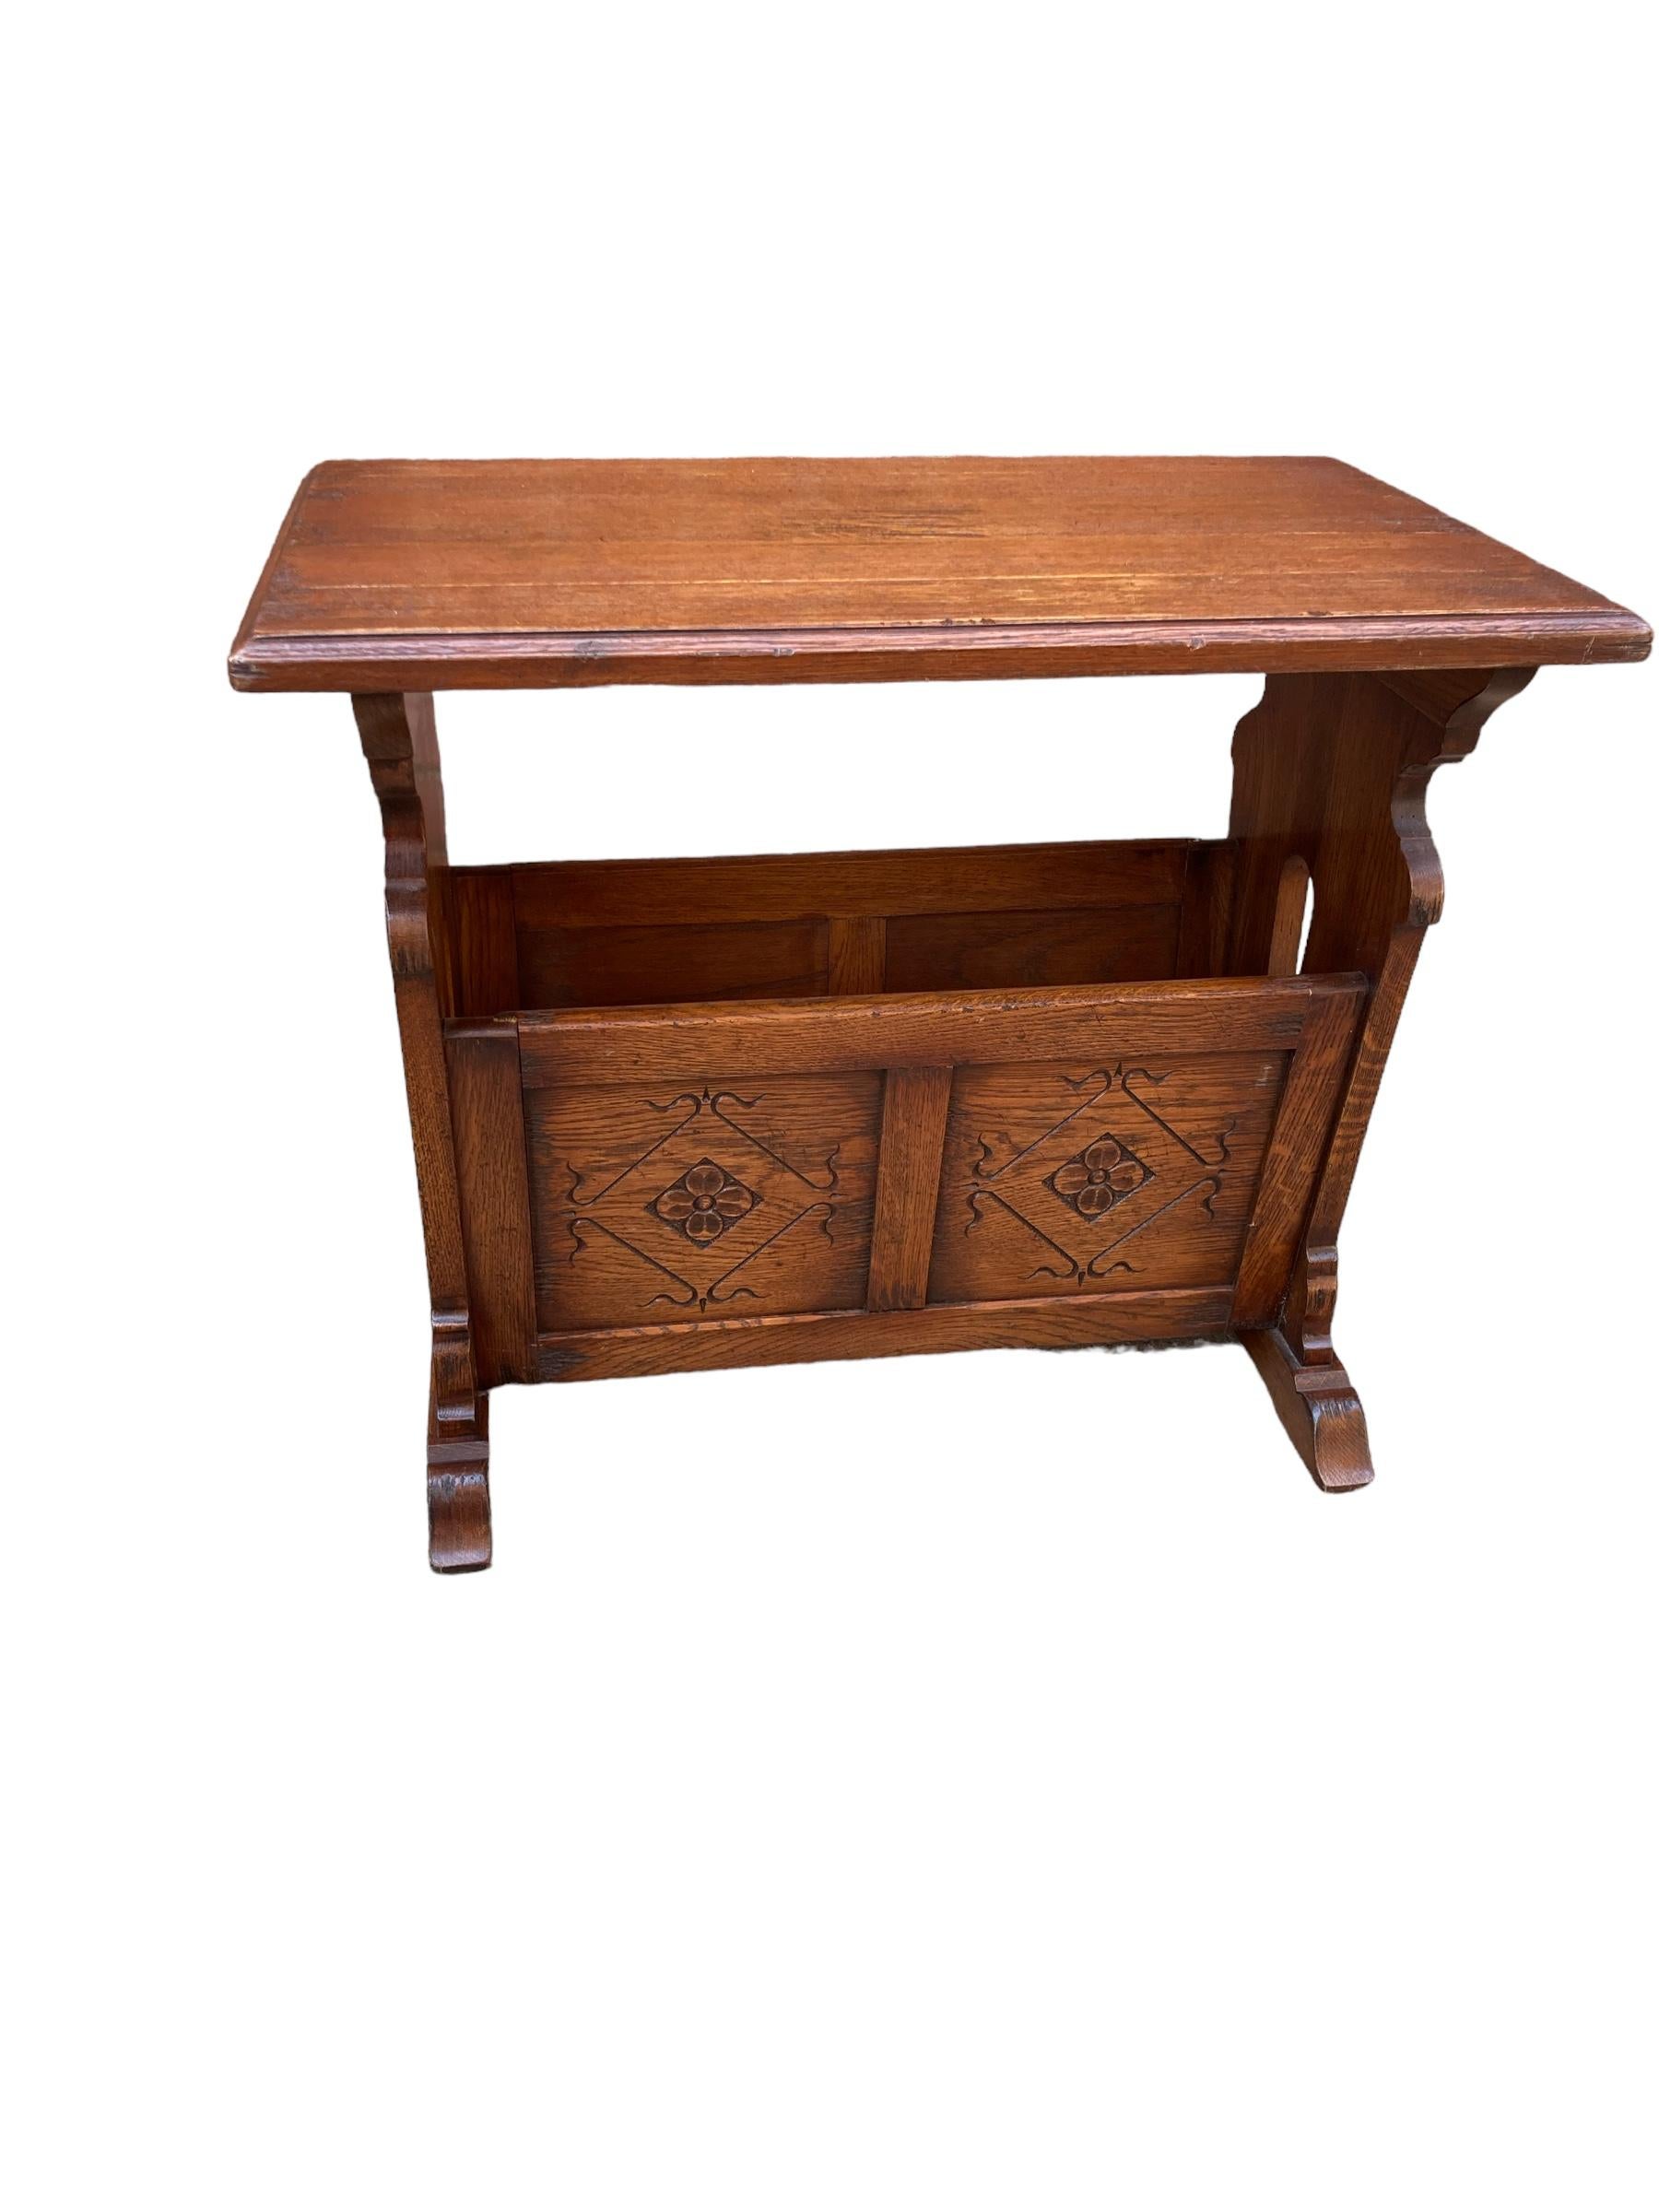 British Old Charm Carved Oak small coffee, side table Magazine Rack